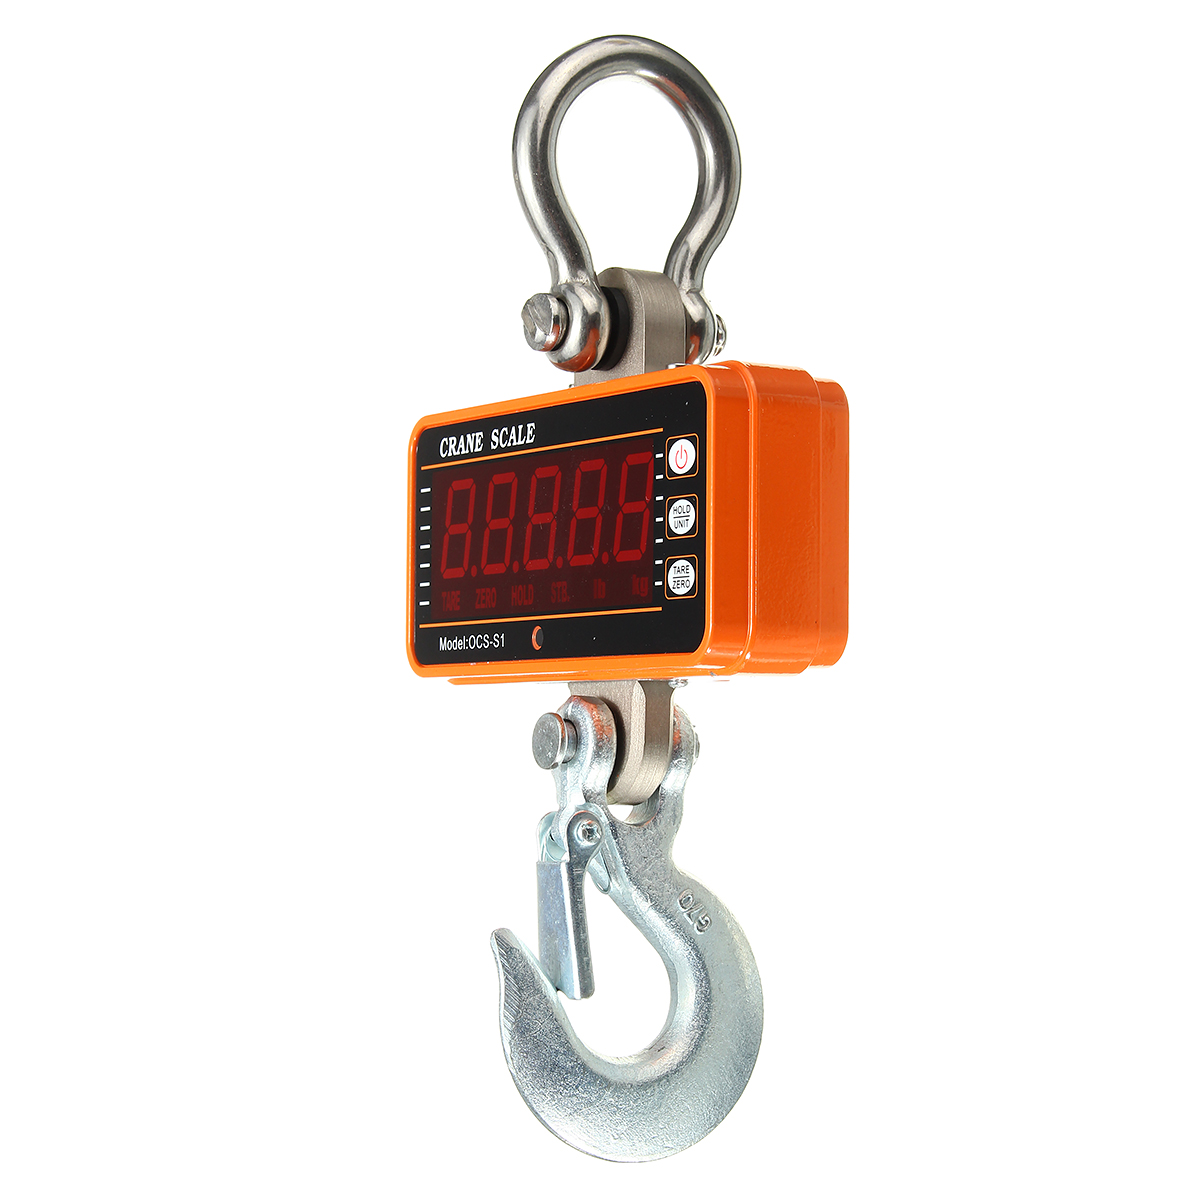 RED HUKOER Crane Scale 1000kg/2000lb Hanging Scale Digital Industrial Heavy Duty Crane Scale Smart High Accuracy Electronic Crane Scale